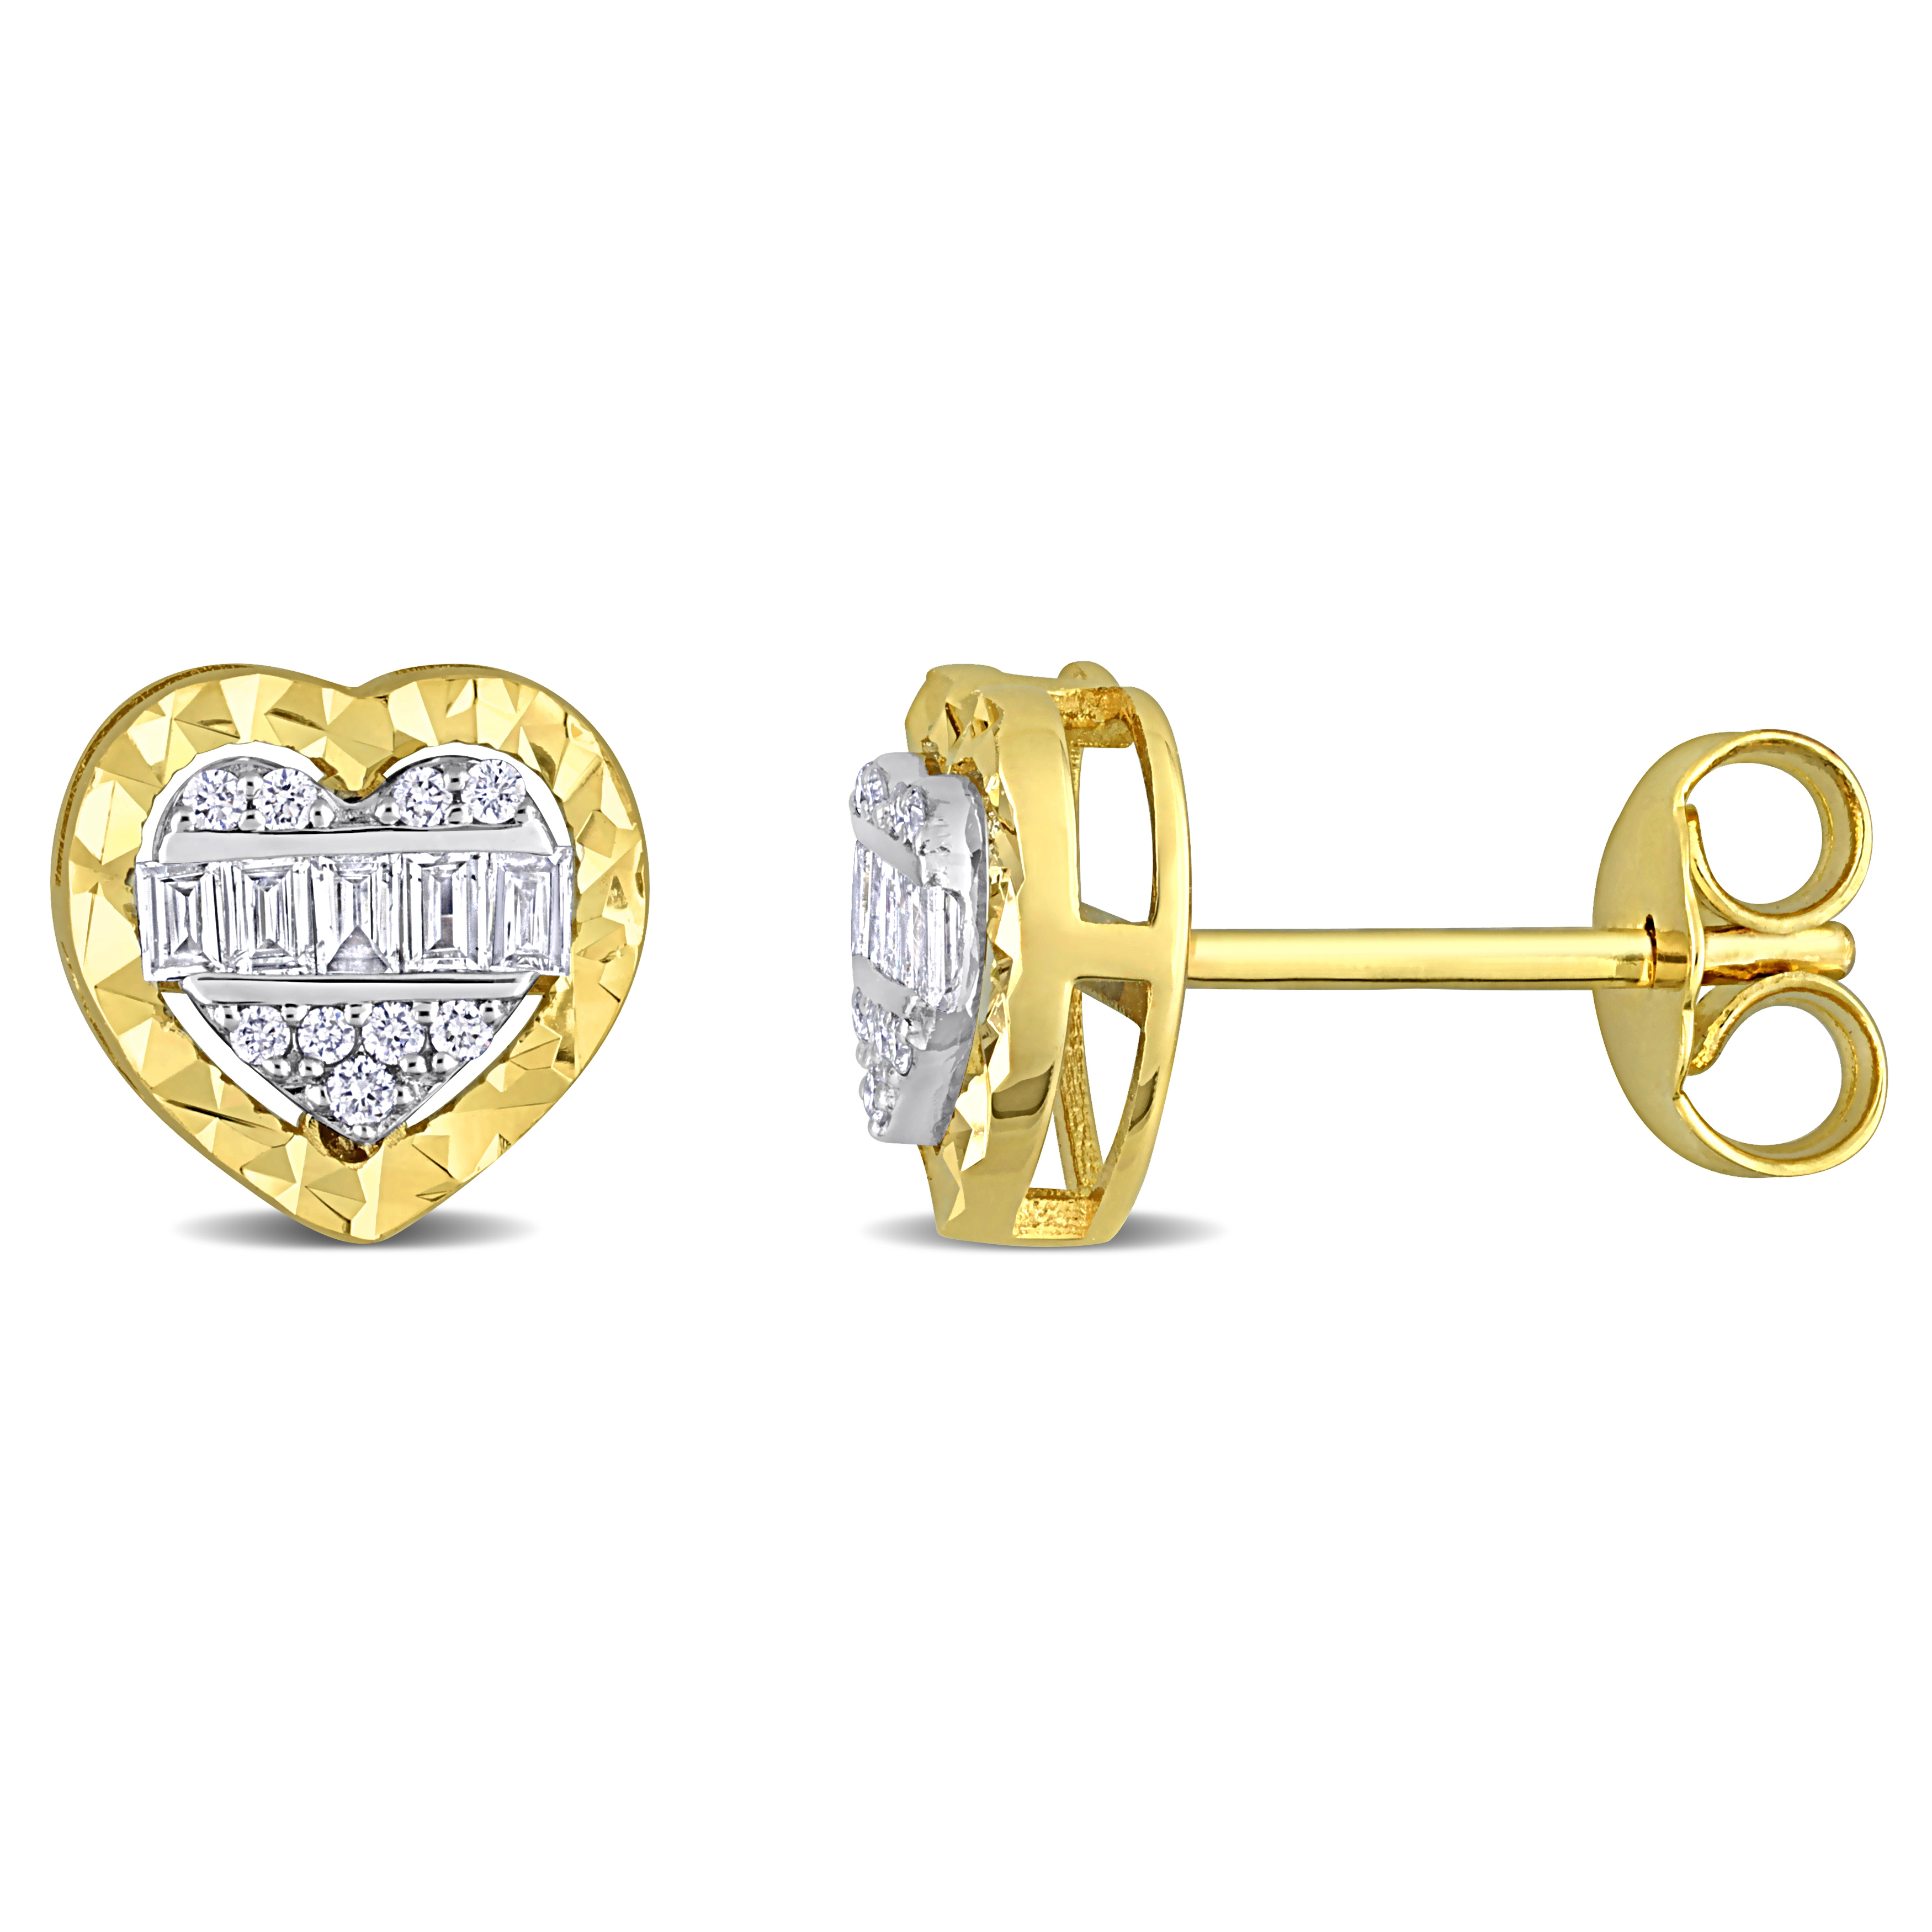 1/4 CT TDW Parallel Baguette and Round-Shaped Diamonds Heart Halo Stud Earrings in 14k 2-Tone White and Yellow Gold